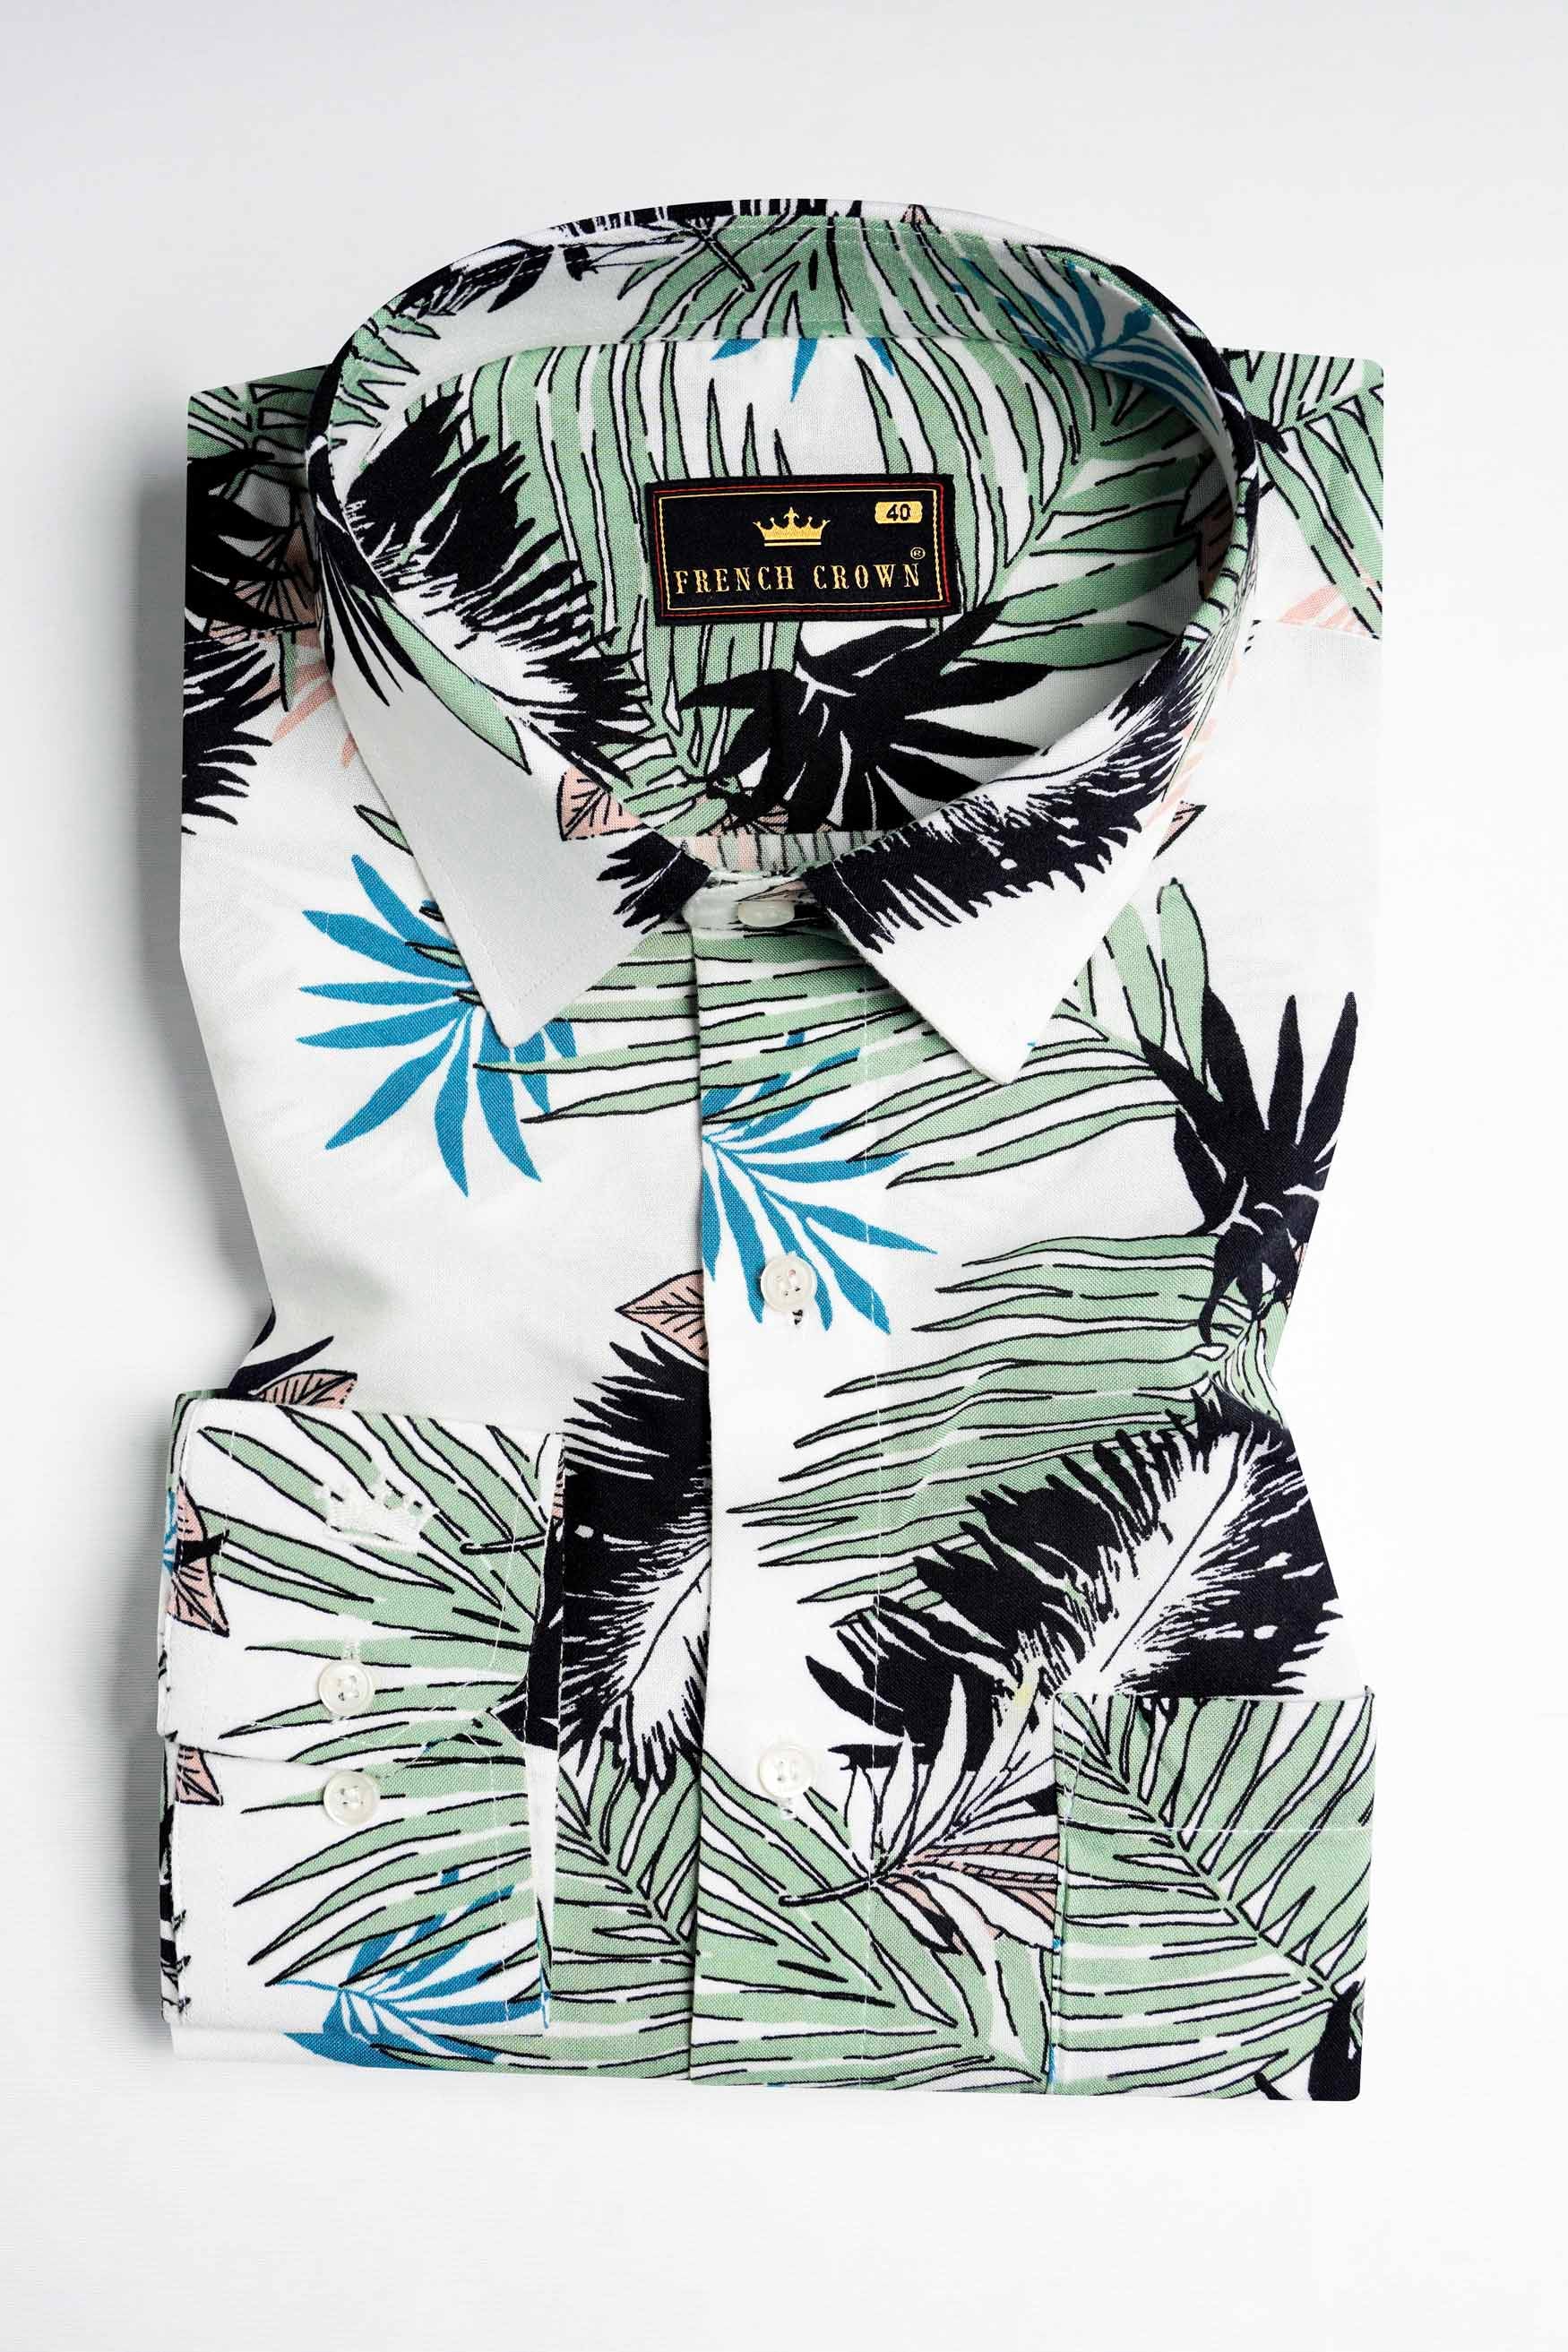 Bright White with Laurel Green and Black Tropical Printed Premium Tencel Shirt